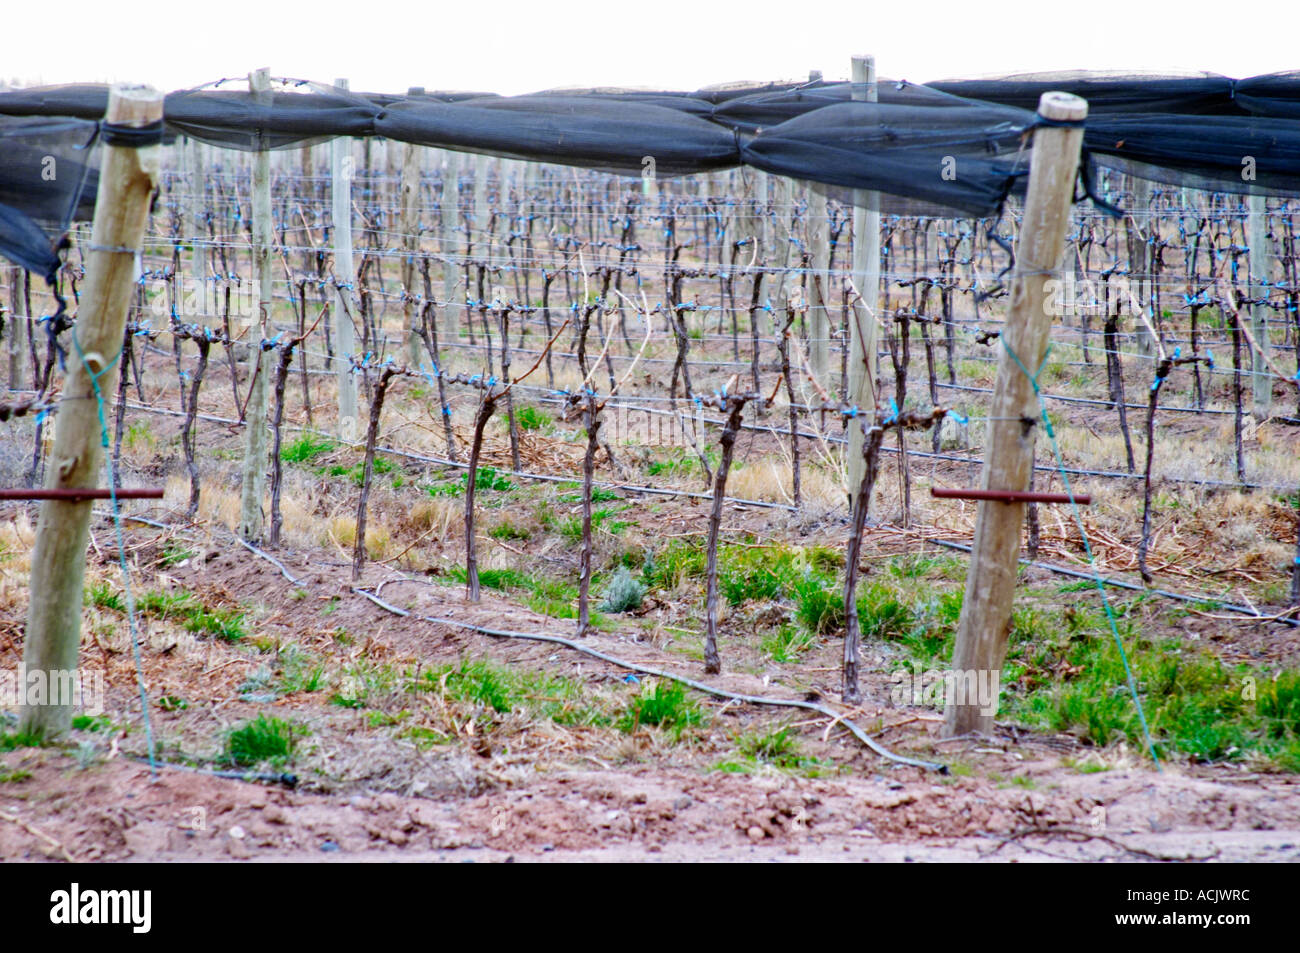 View over the vineyard, soil and young vines, drip irrigation. with netting used to shield and protect the vines from birds and from hail damage. NQN Winery, Vinedos de la